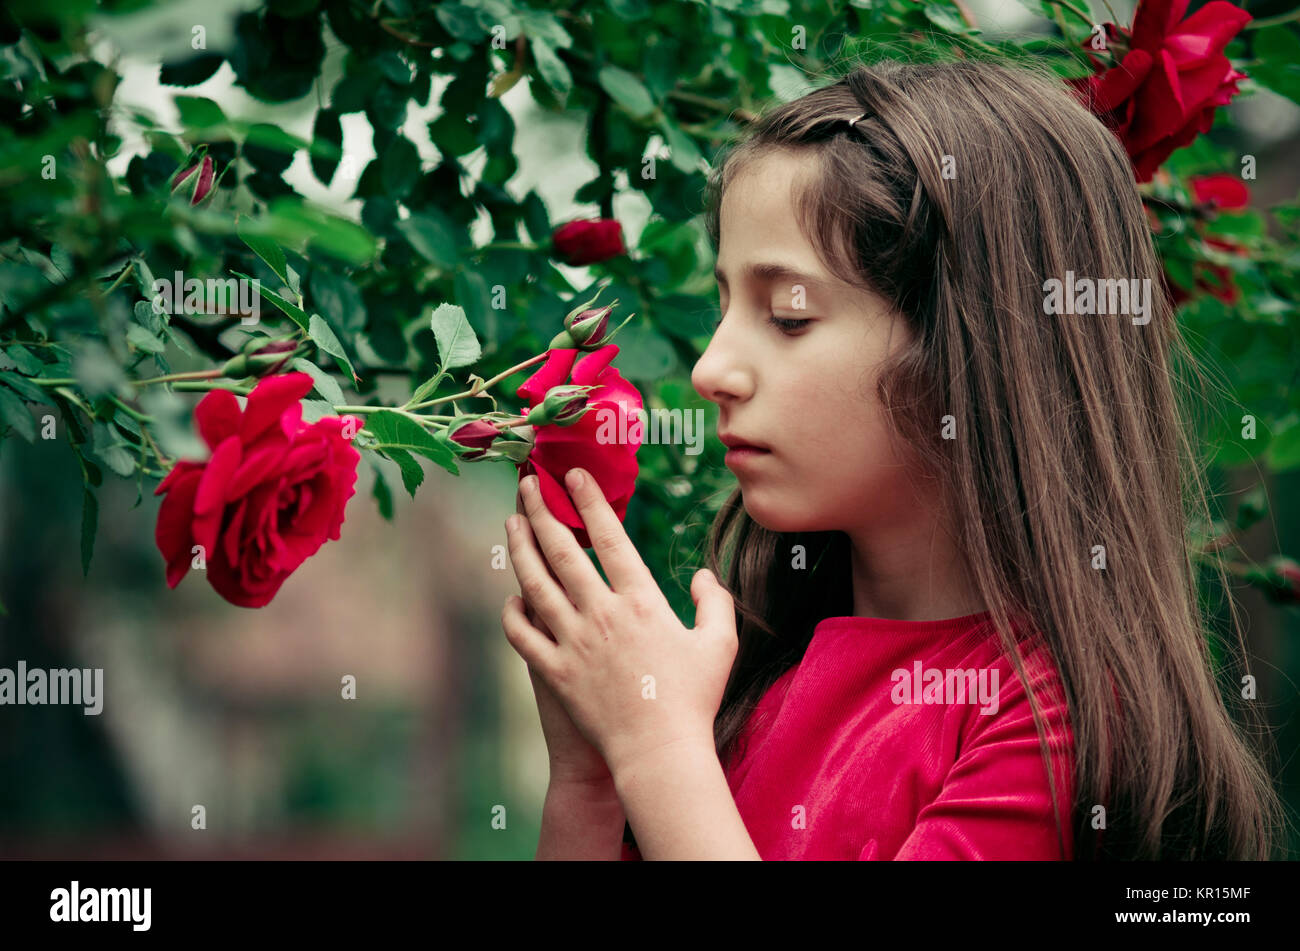 Portrait of pretty young girl 8-12 years holding and smelling Bulgarian red roses outside. Creative and colorful image. Stock Photo